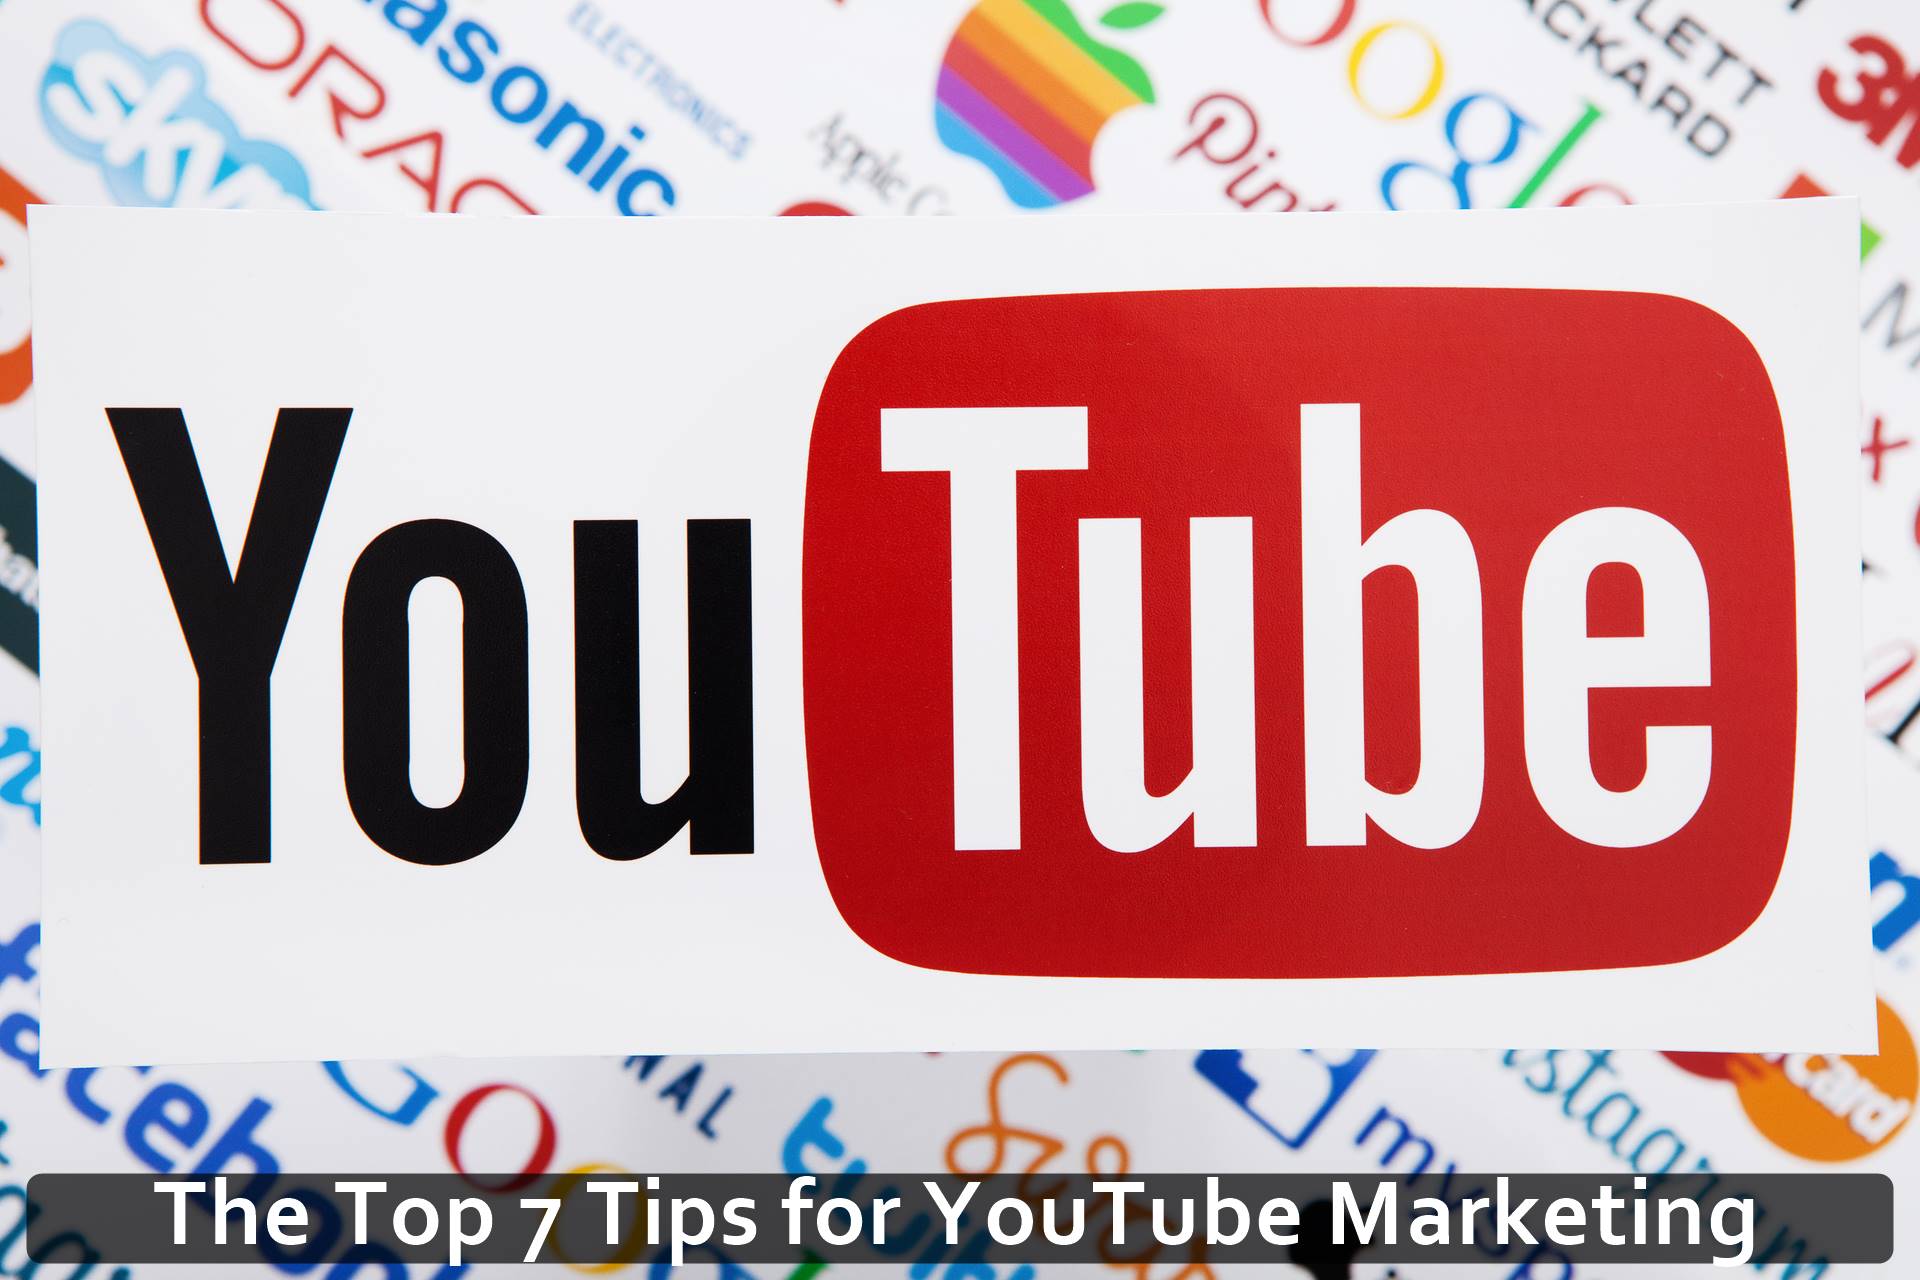 The Top 7 Tips for YouTube Marketing